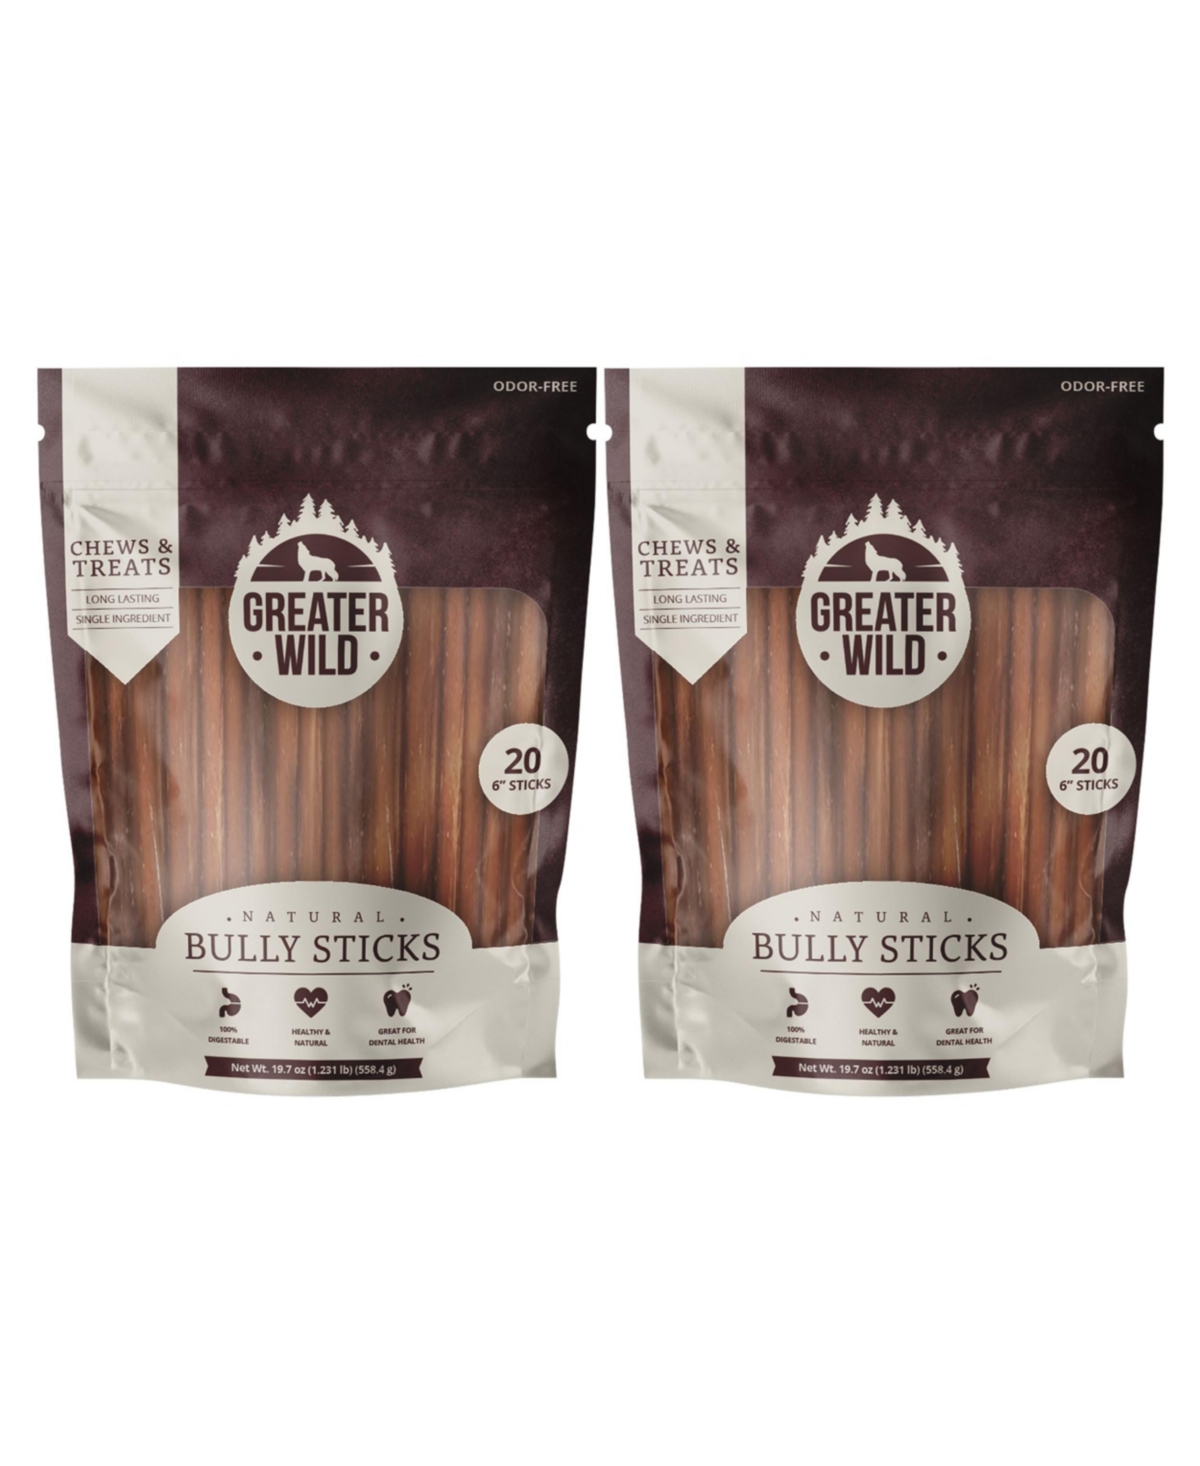 6" Single-Ingredient Beef Bully Sticks, All-Natural Dog Treats - 40 Sticks - Brown